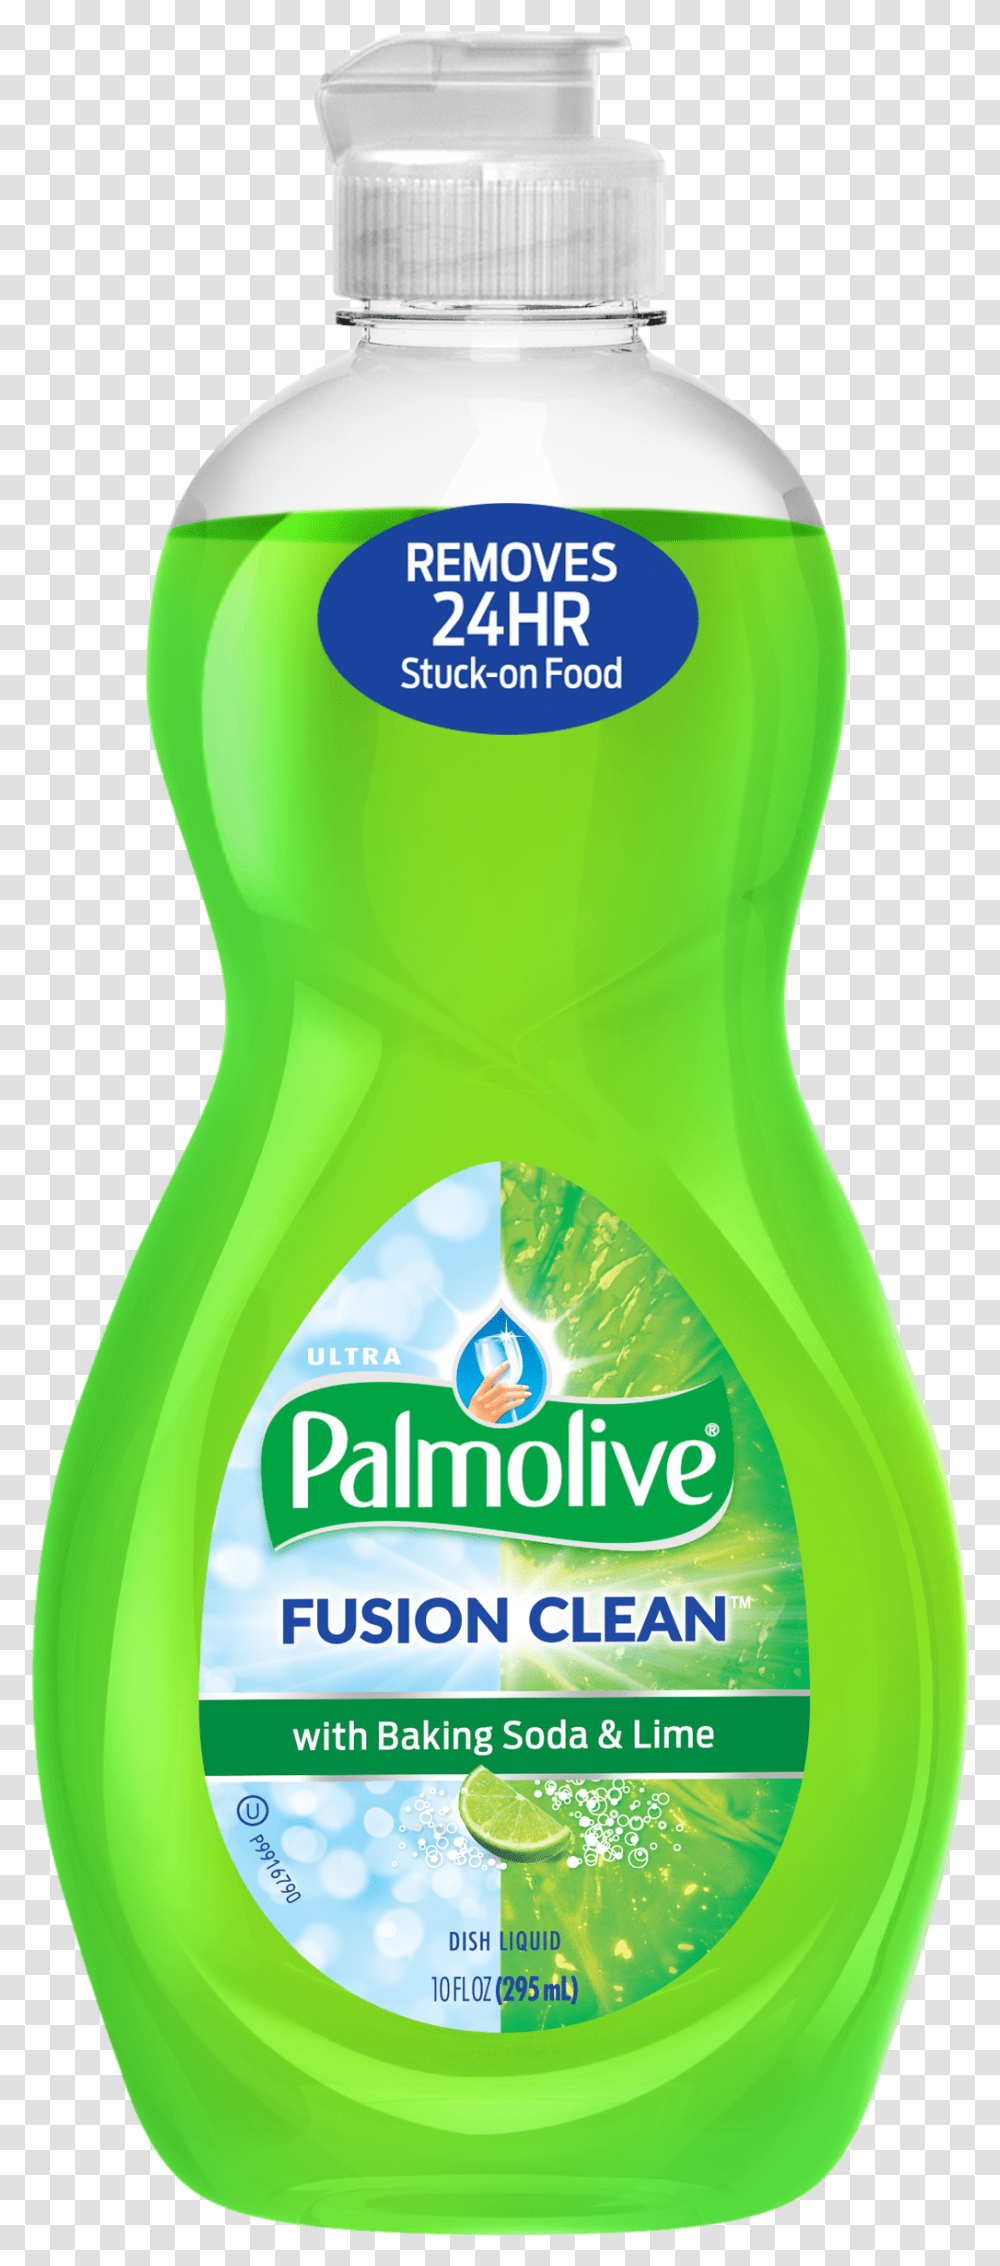 Palmolive Ultra Fusion Clean Dish Soap Baking Soda Dish Soap Background, Bottle, Shampoo, Cosmetics, Label Transparent Png